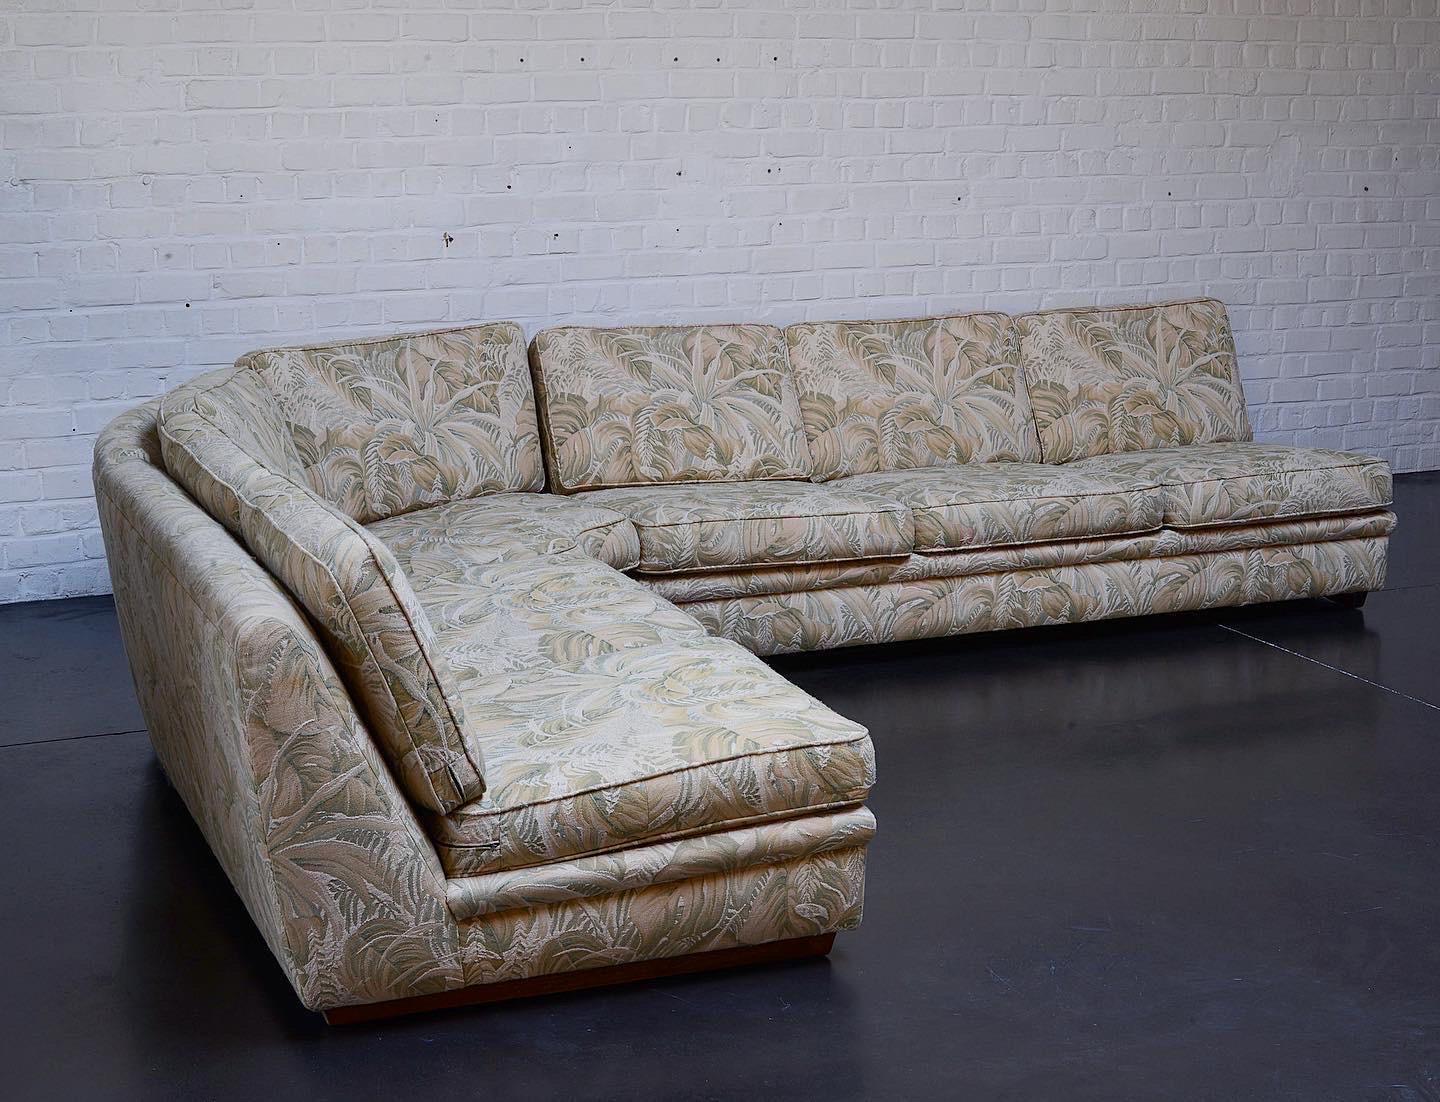 Sectional sofa with thick Jungle embroidery fabric made in Sweden in the 70's. The foot are Mae of hardwood. There's 3 elements, a double seater + a three seater and a corner. The original fabric is still on it and in remarkable condition. Very